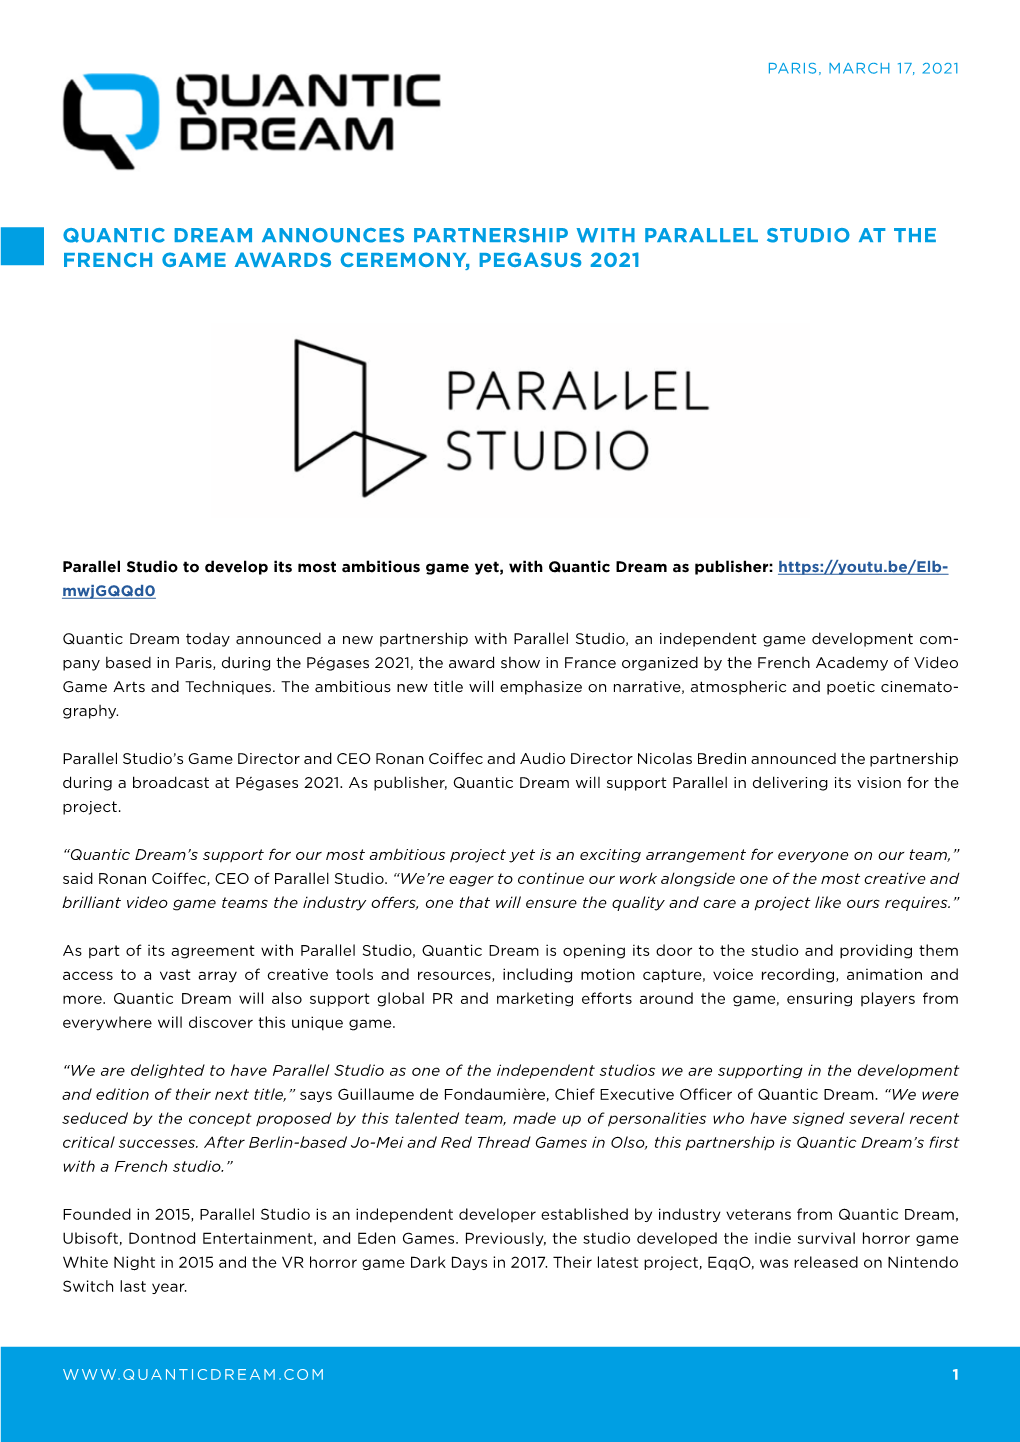 Partnership with Parallel Studio at the French Game Awards Ceremony, Pegasus 2021